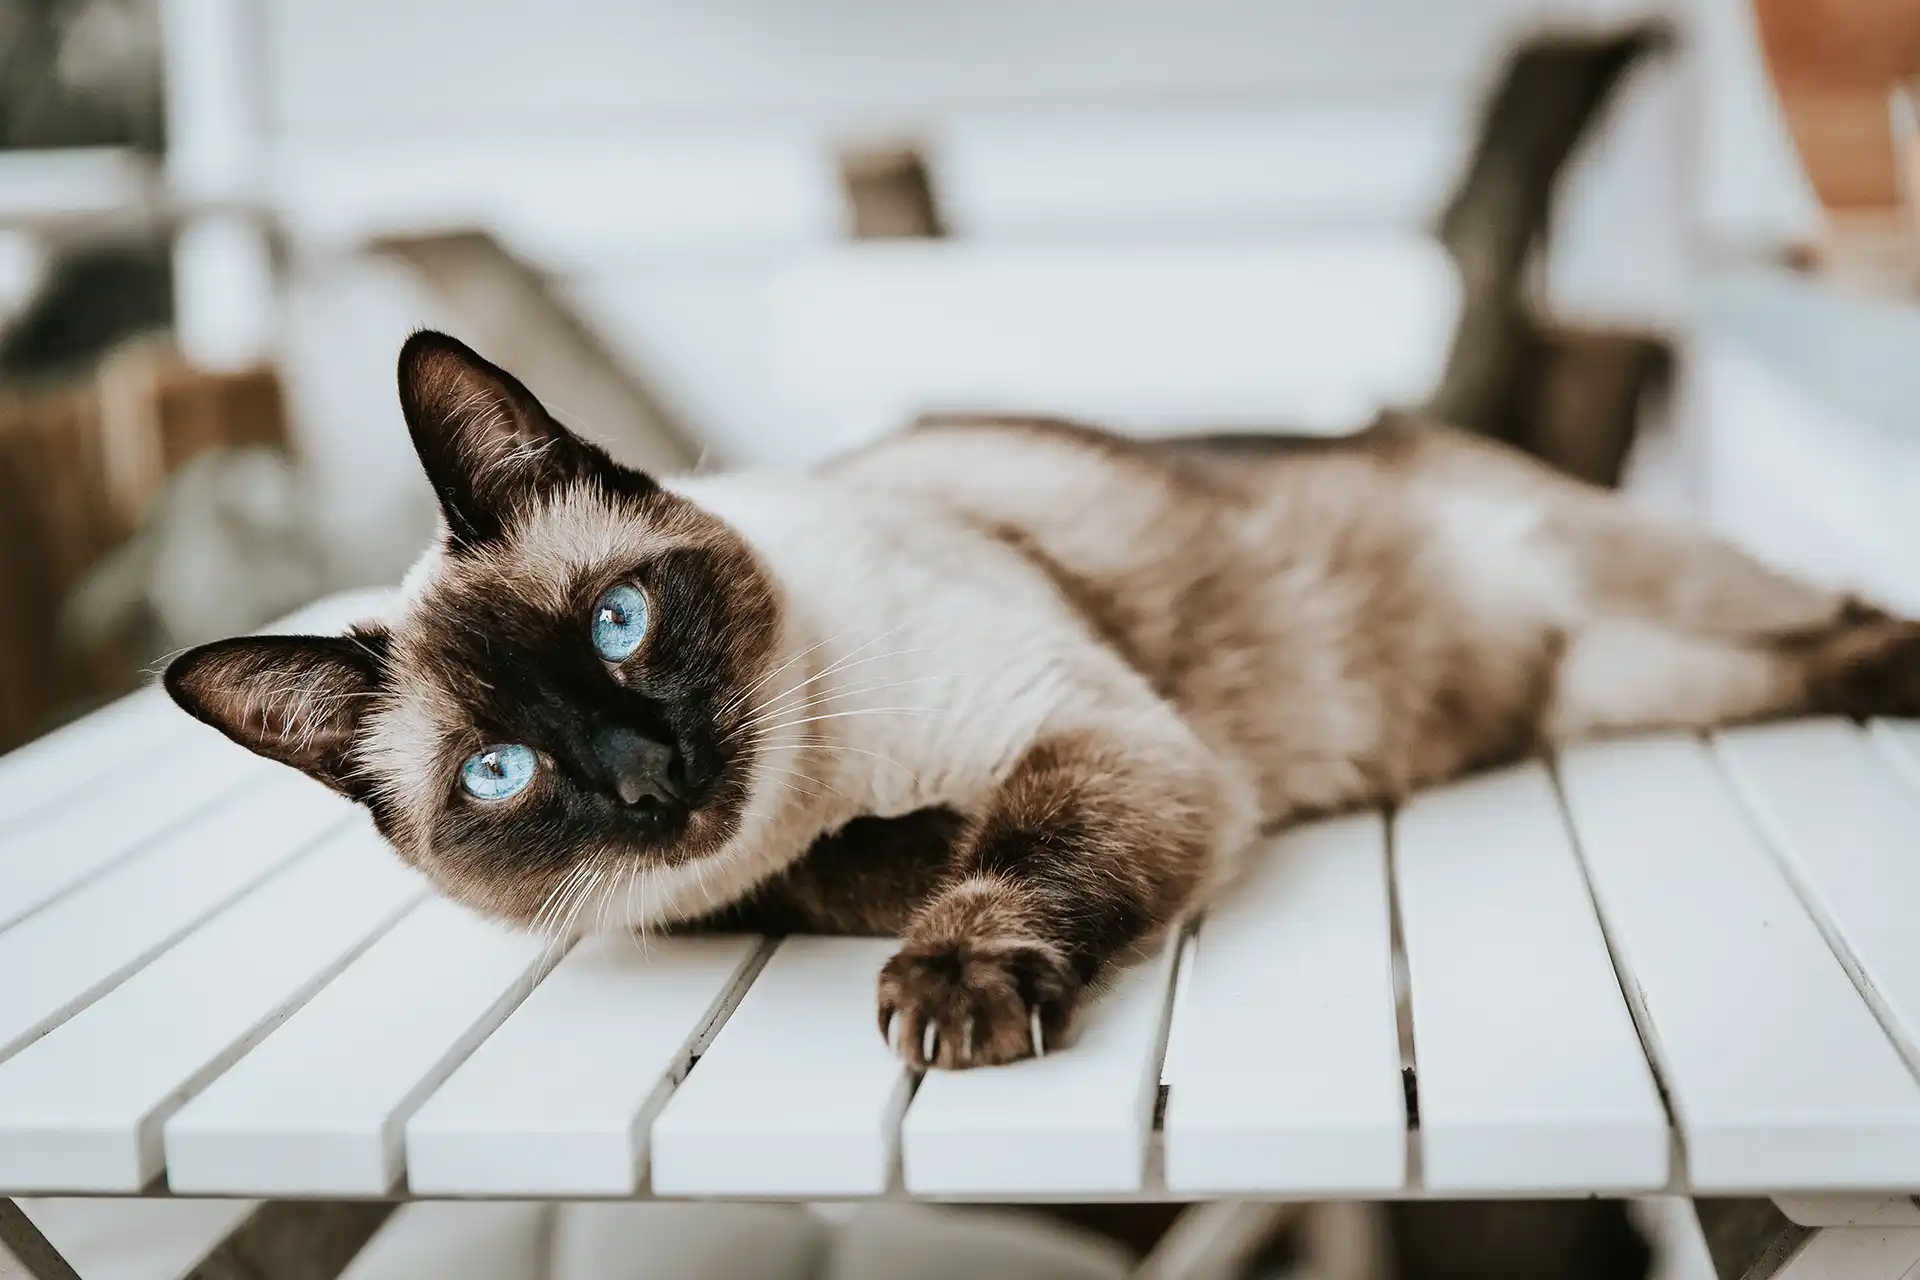 Siamese cat with light blue eyes resting on a table